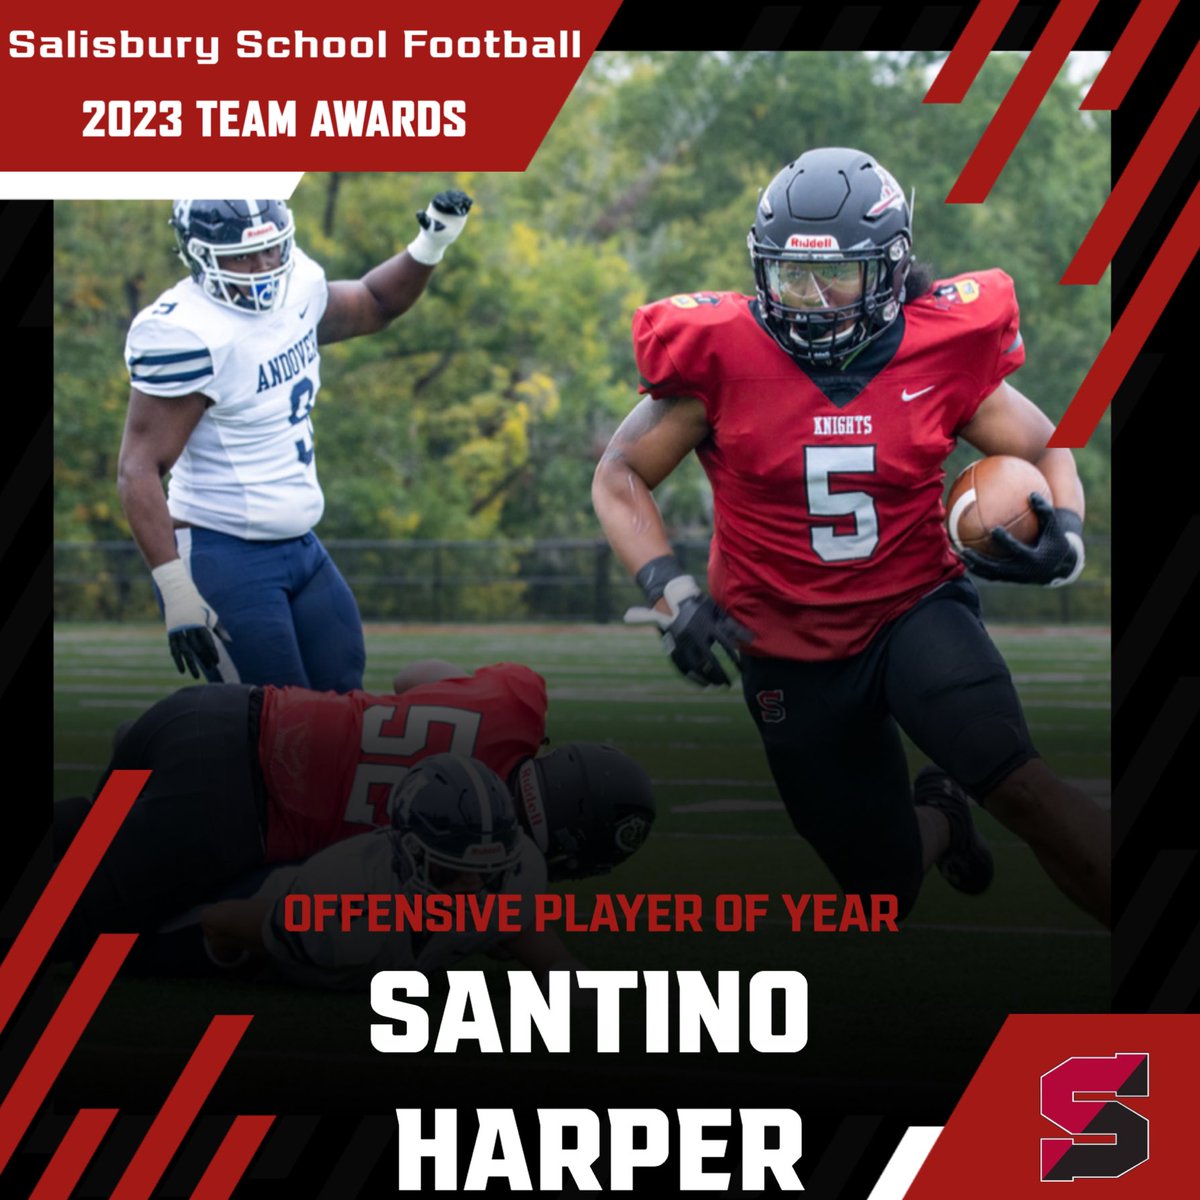 Congratulations to Santino Harper ‘24 on his recognition as the Jonathan Boyce and Patrick Stein Offensive Player of the Year. Congrats Tino! ⁦@SarumAthletics⁩ ⁦@harper_santino⁩